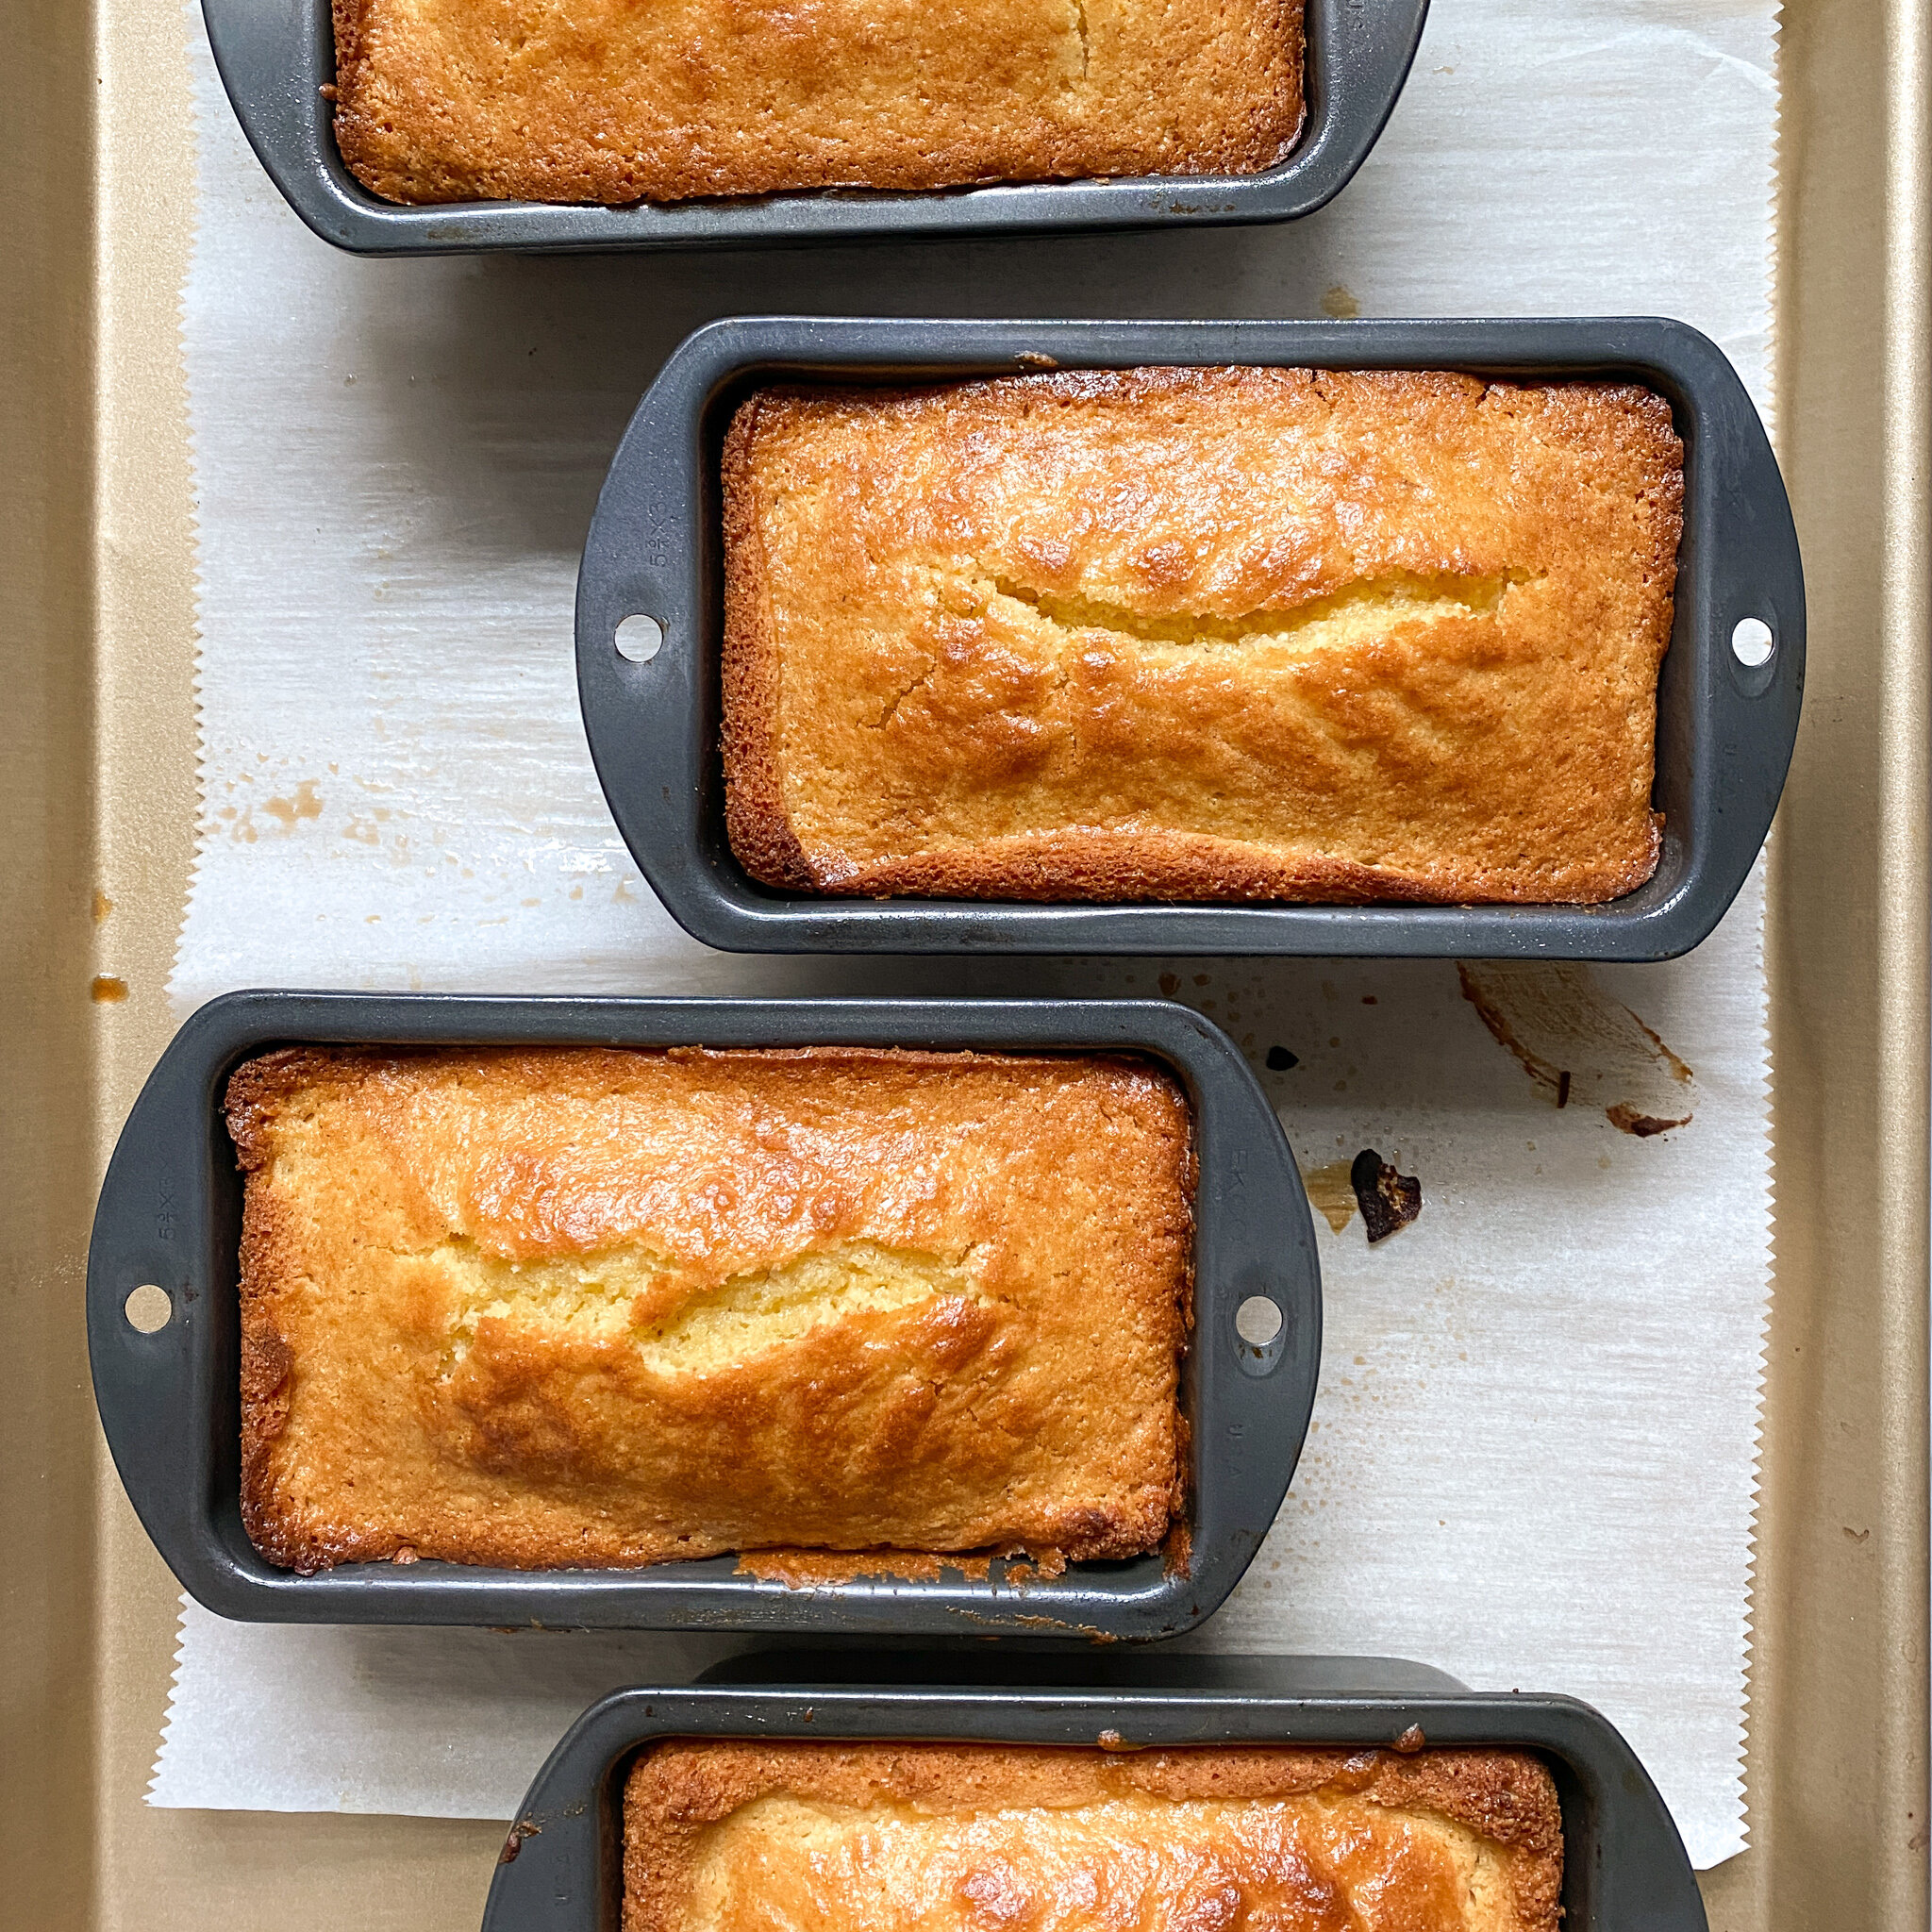 Sweet Cornbread — In the Curious Kitchen